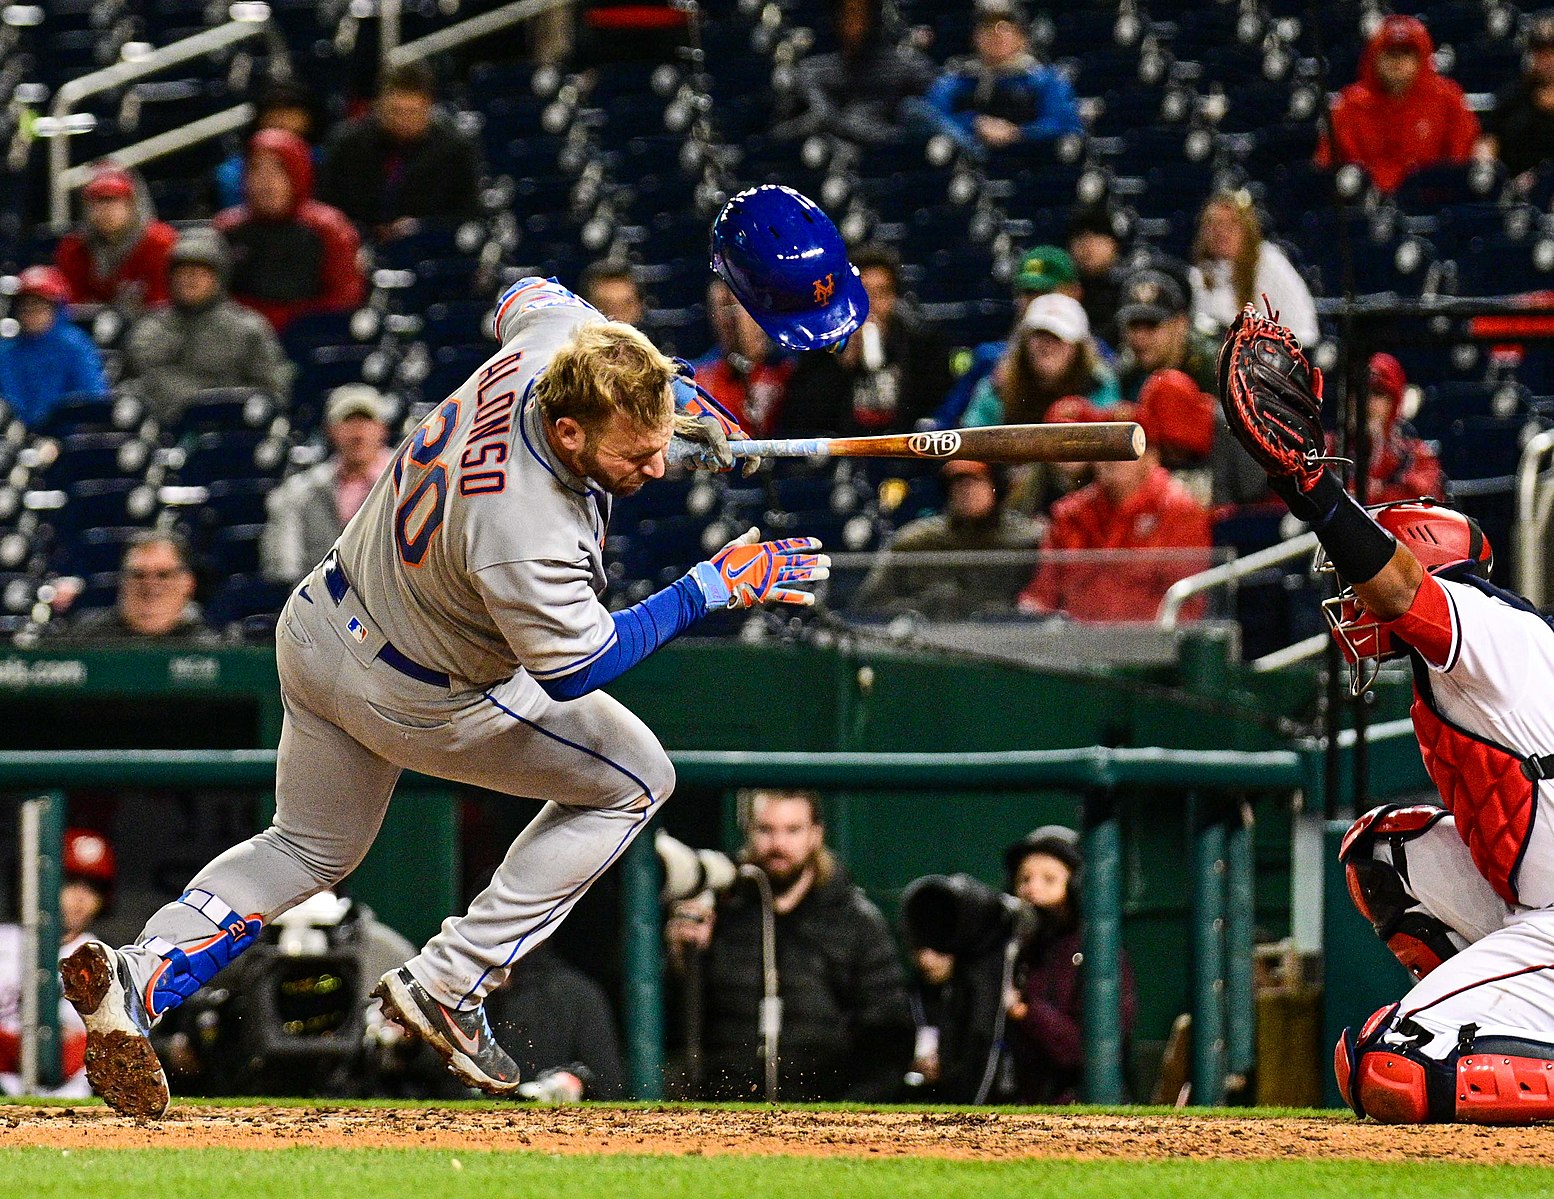 Mets may become sellers at the trade deadline